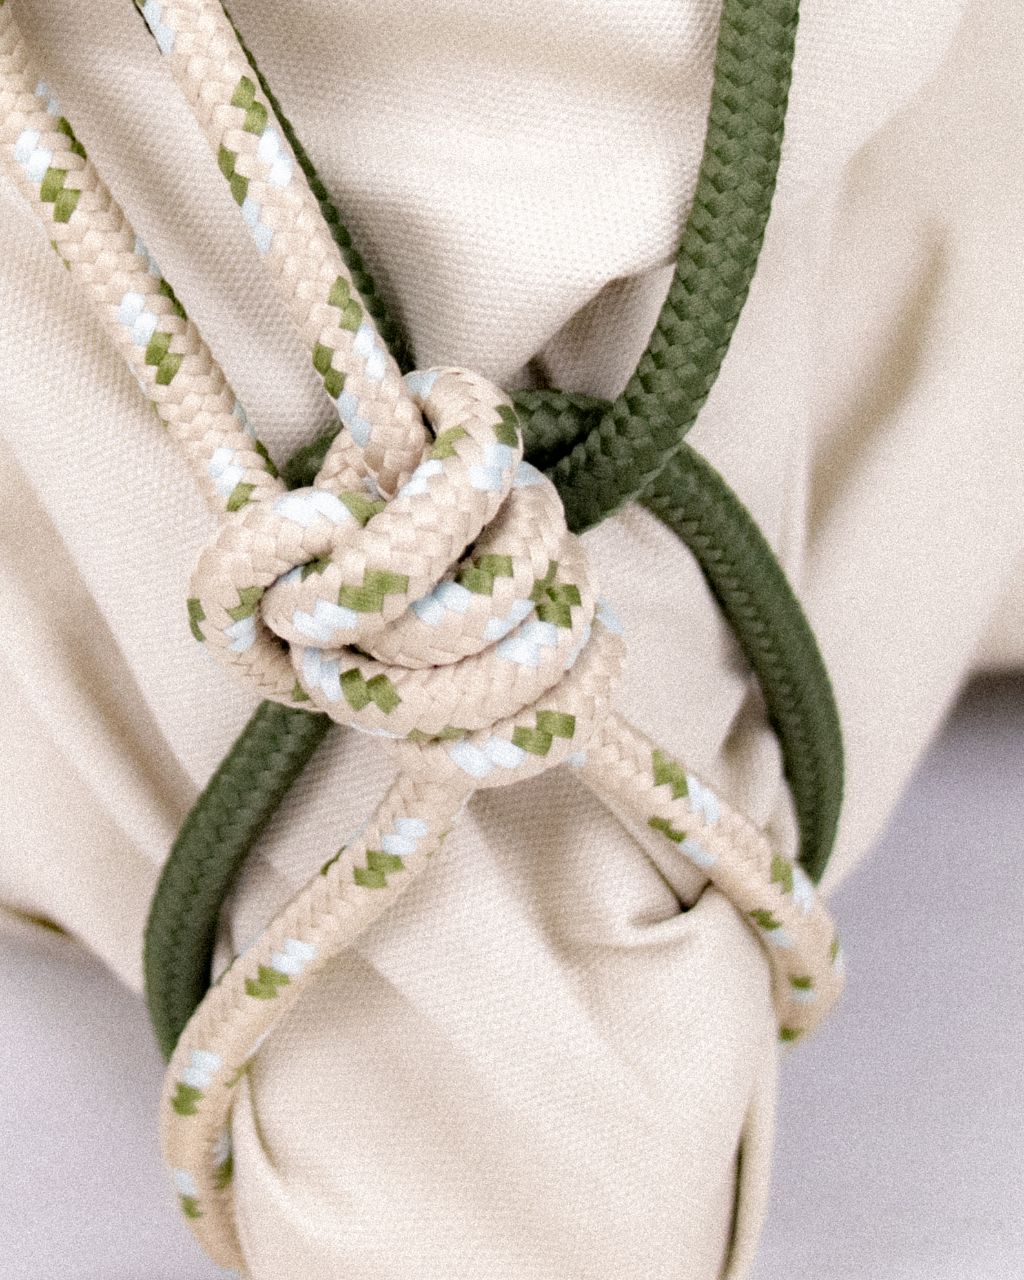 Add-On Paracord Style Strap